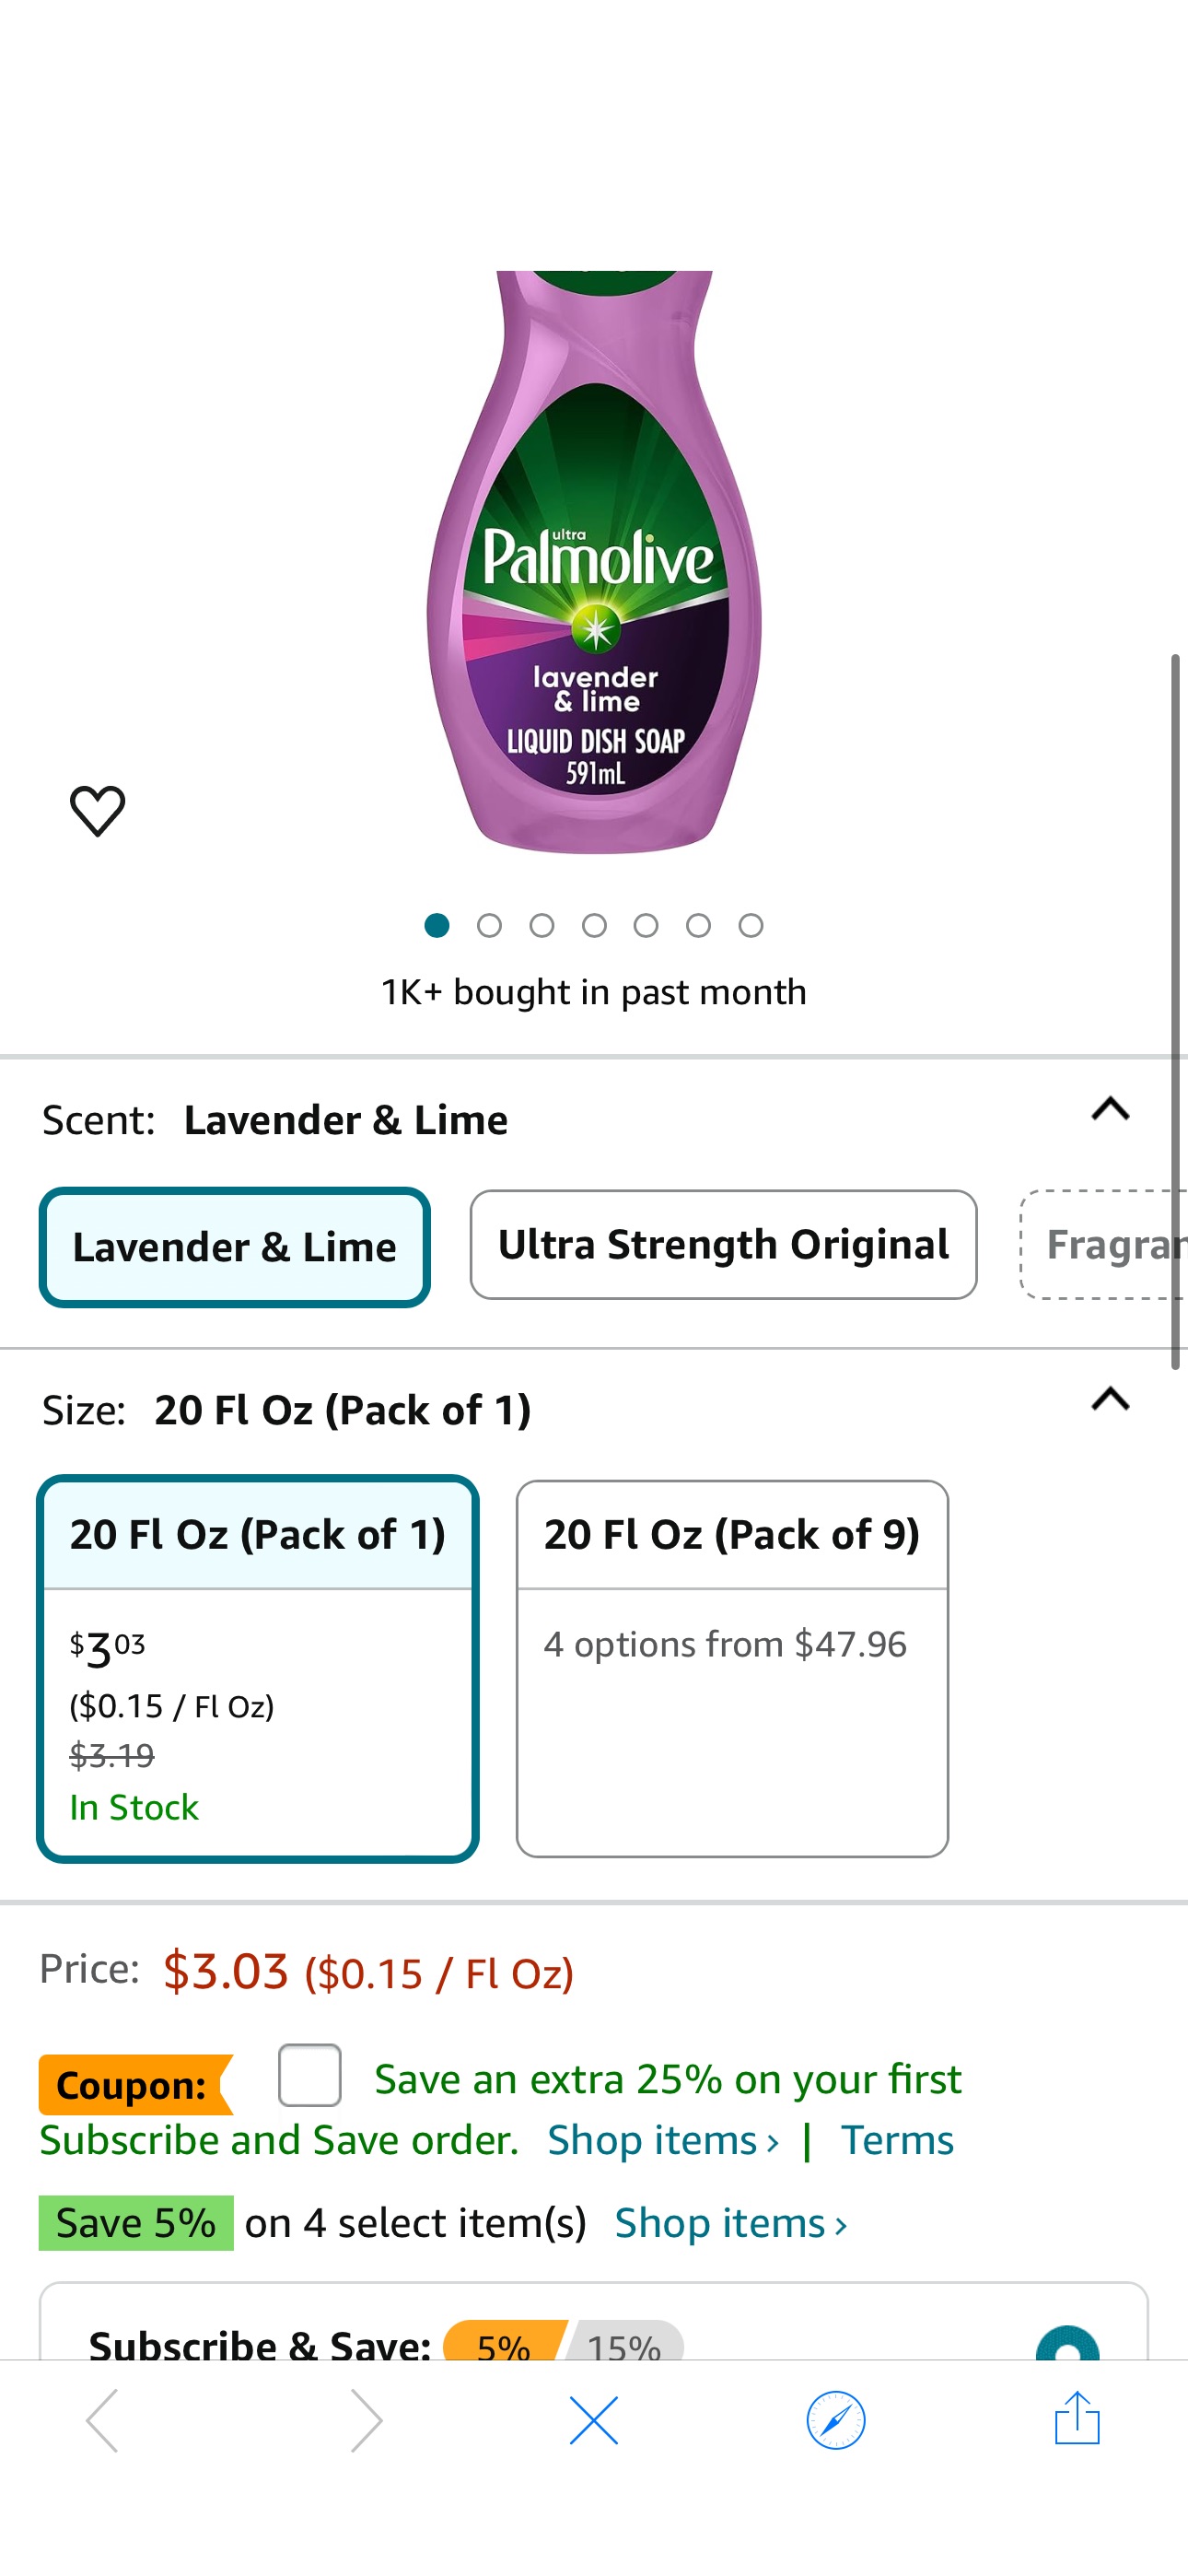 Amazon.com: Palmolive Ultra Experientials Liquid Dish Soap, Lavender & Lime Scent, 20 Fl Oz (Pack of 1) : Health & Household clip coupon